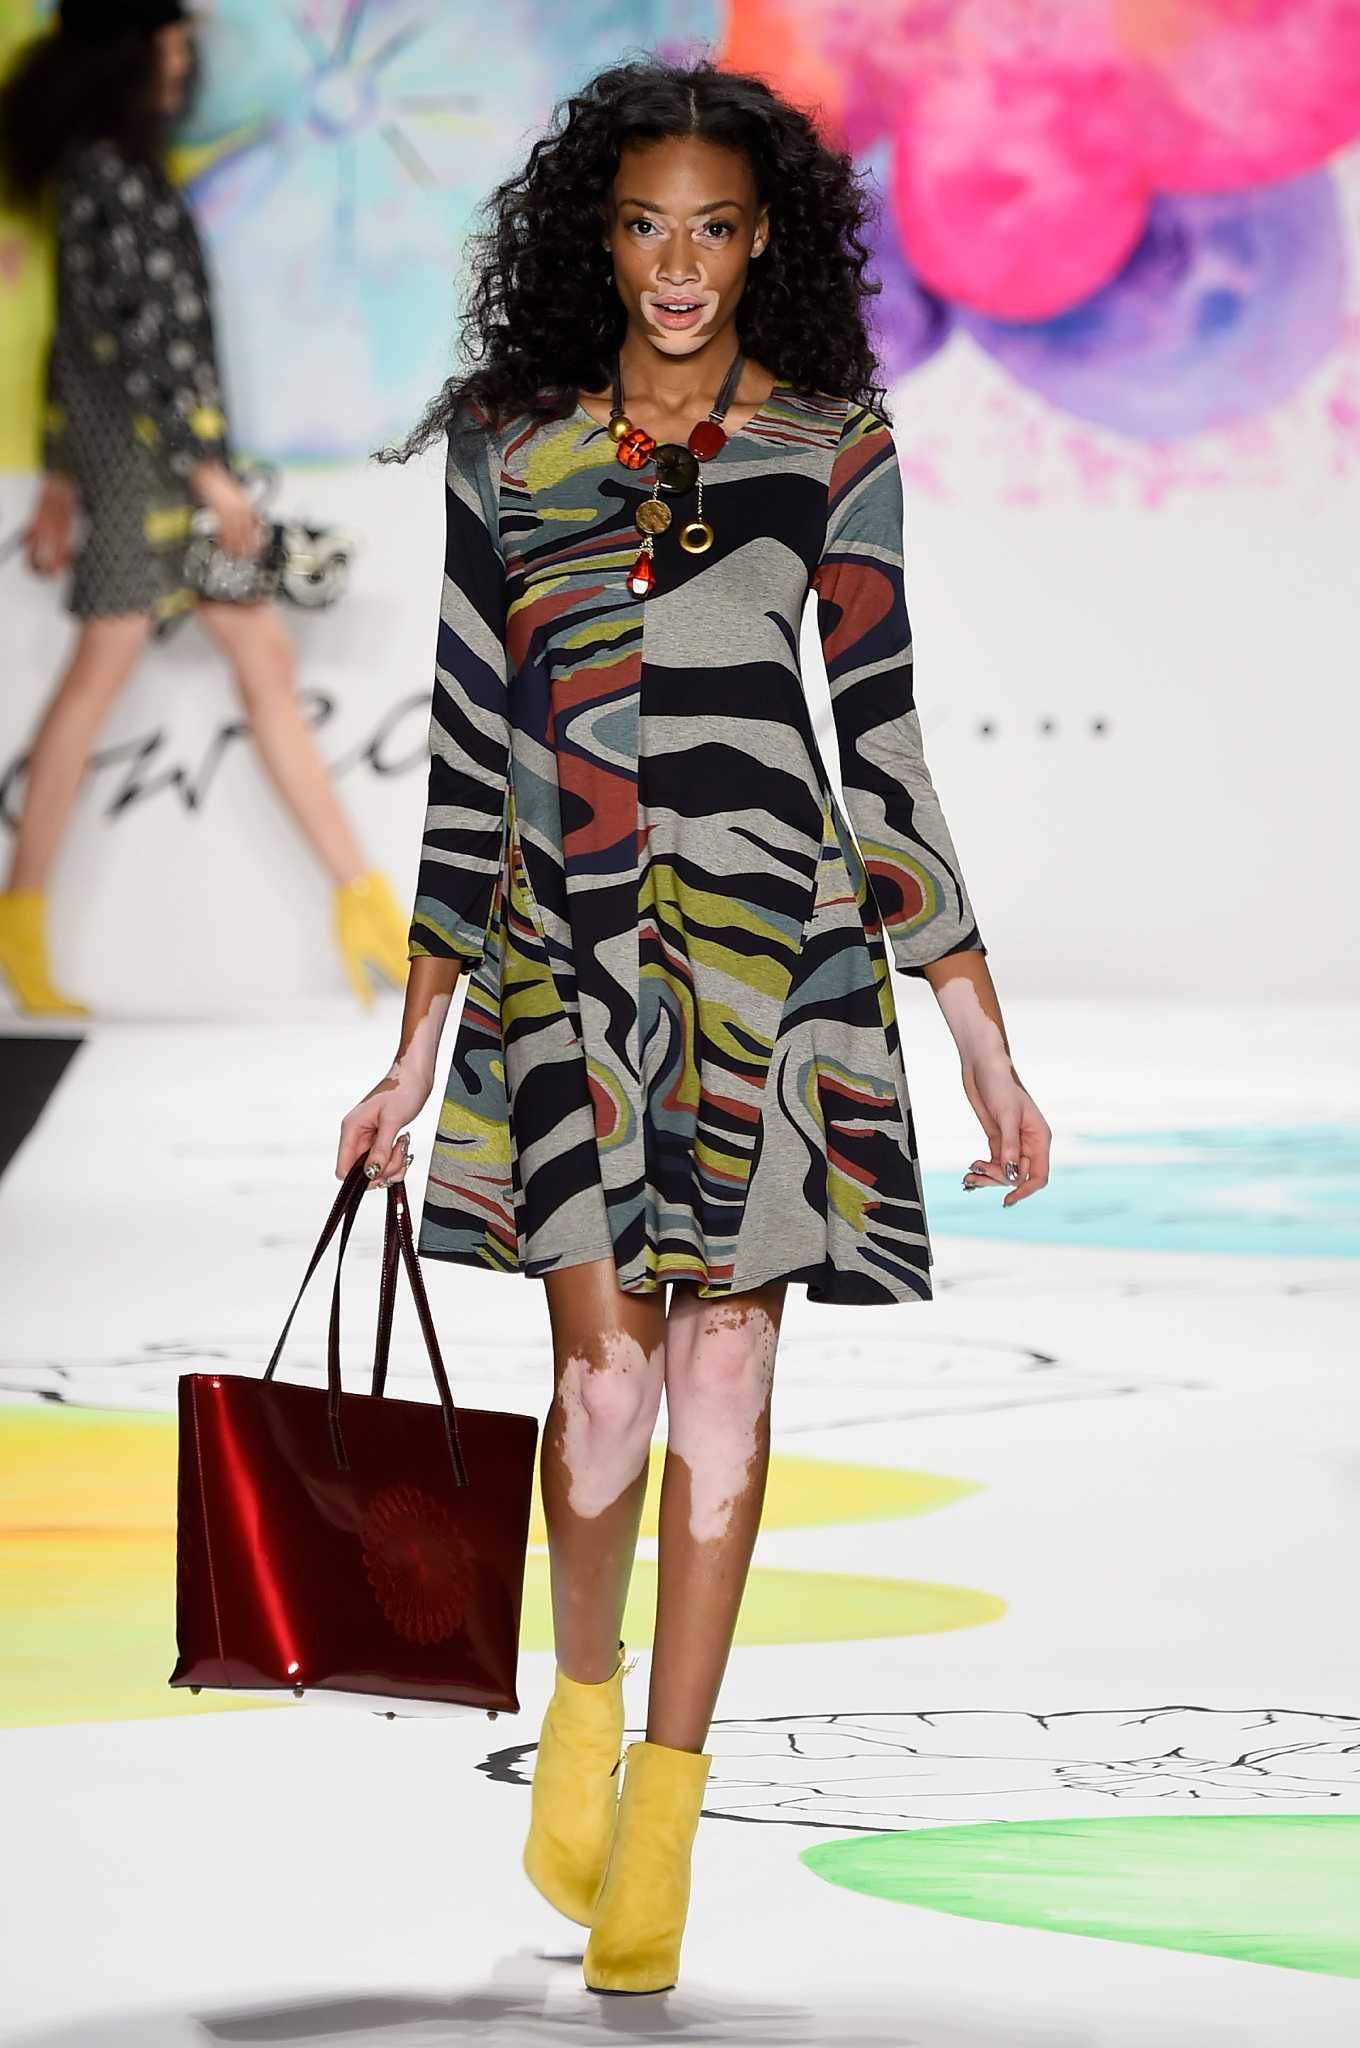 Model With 24-inch Waist Allegedly 'Too Big' for Louis Vuitton Runway  [Updated] - Fashionista